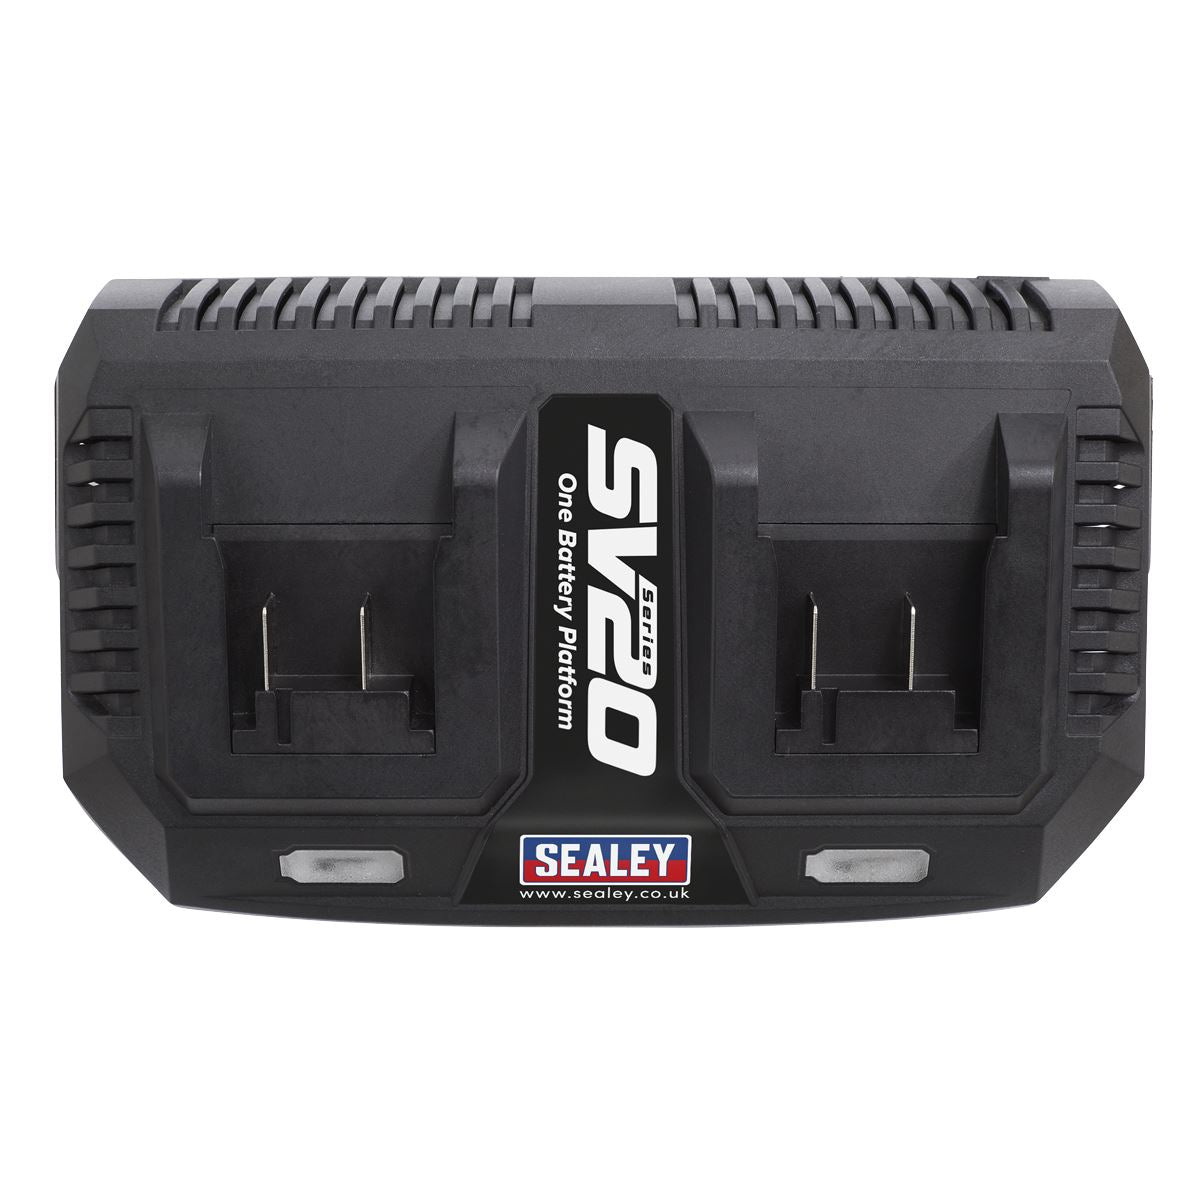 Sealey Dual Battery Charger 20V Lithium-ion for SV20 CP20V Series Cordless Power Tools